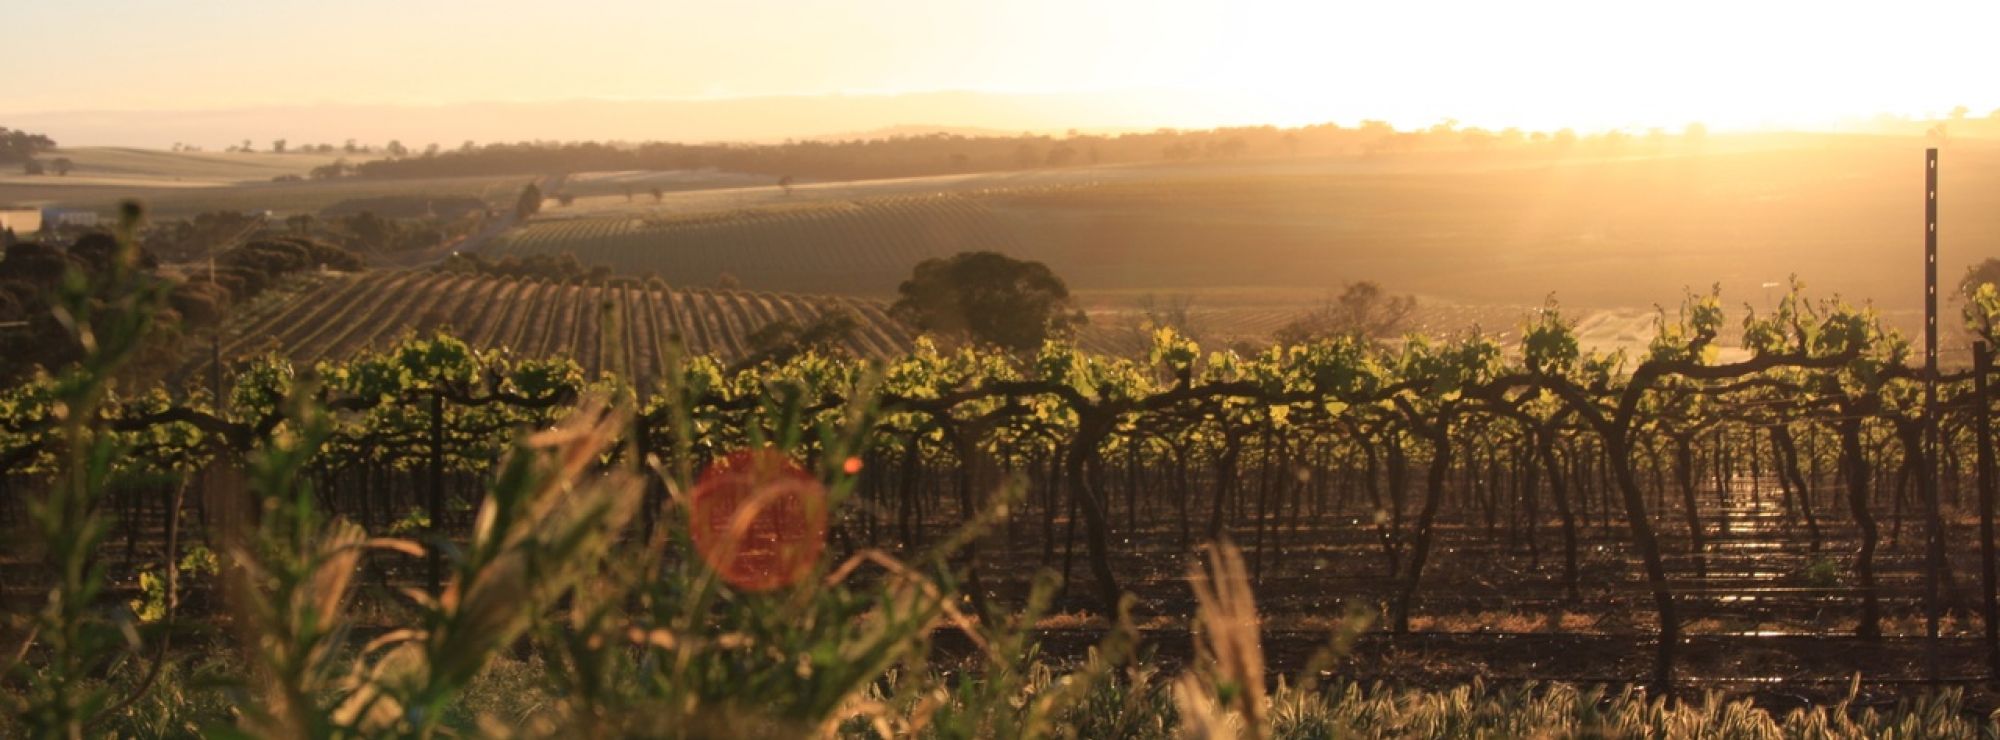 Wakefield Wines: Sunset in the Clare Valley